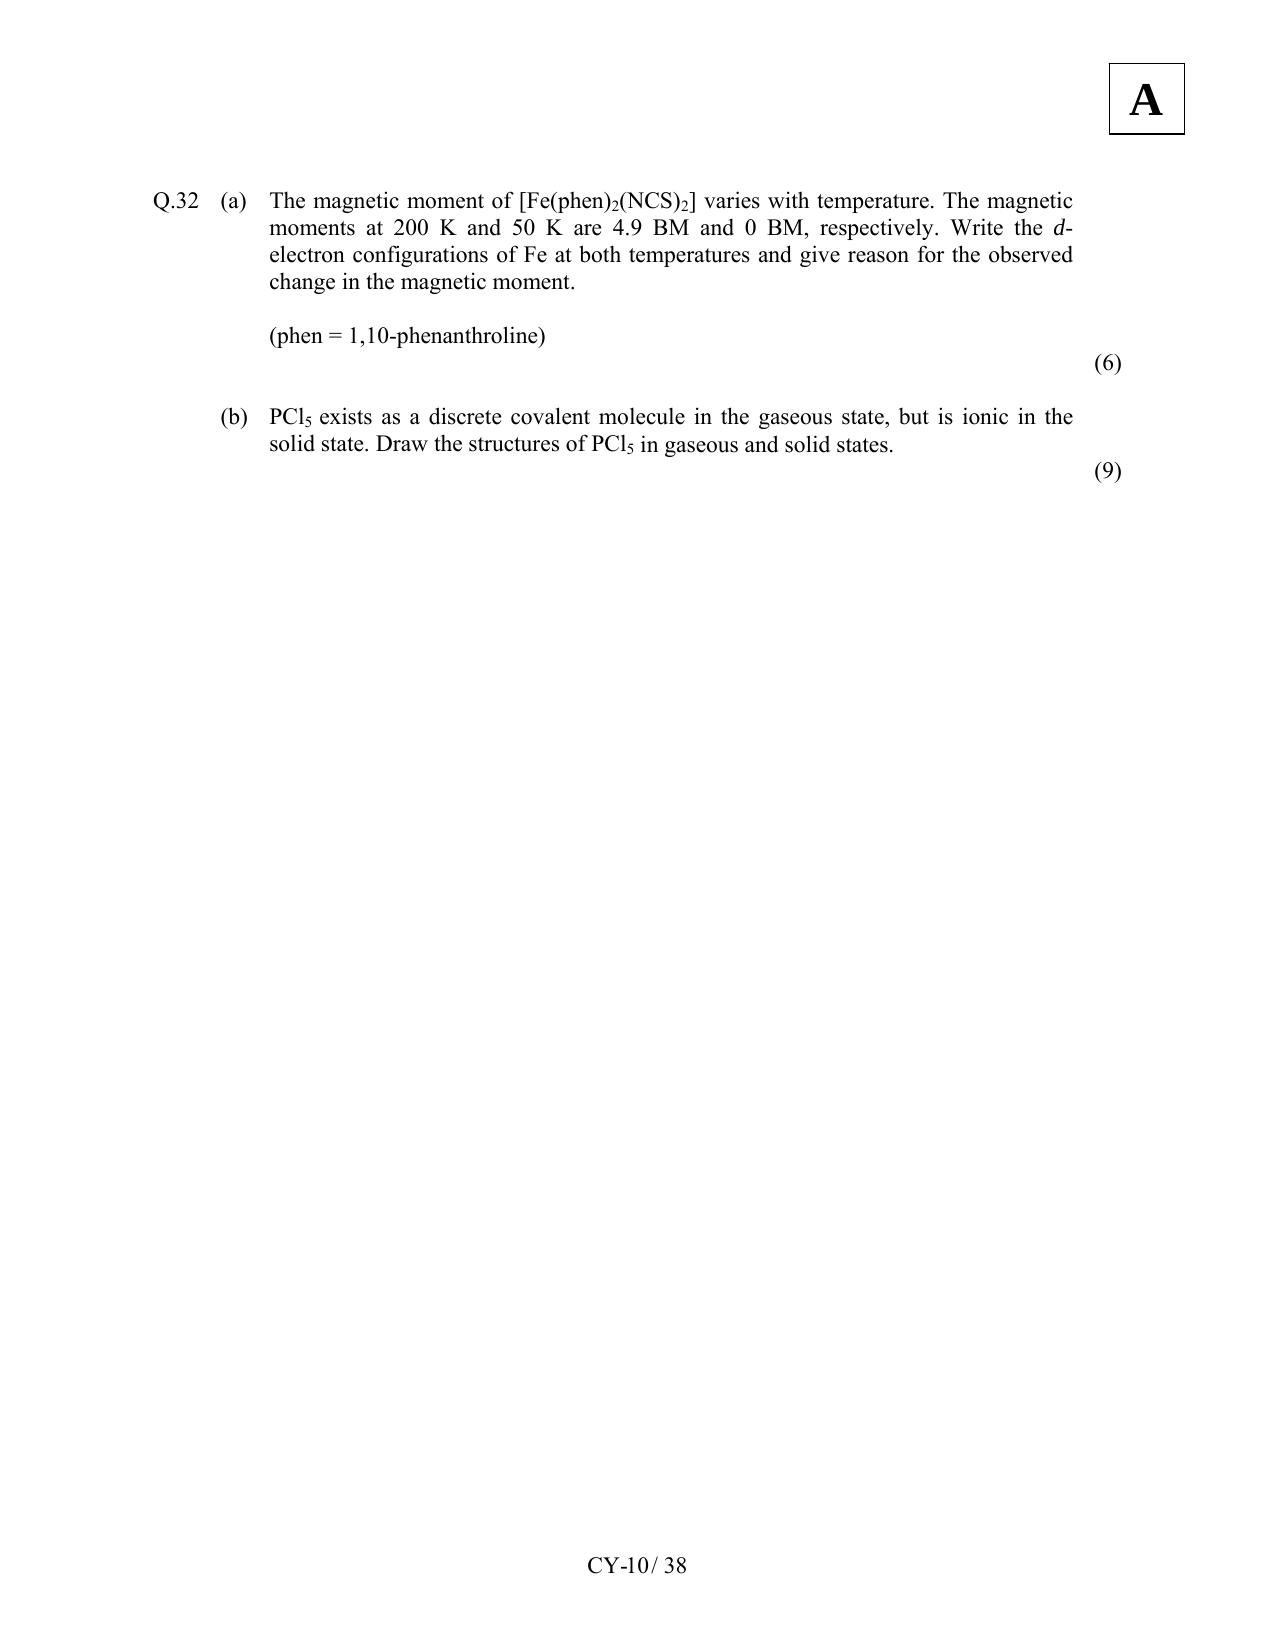 JAM 2011: CY Question Paper - Page 12